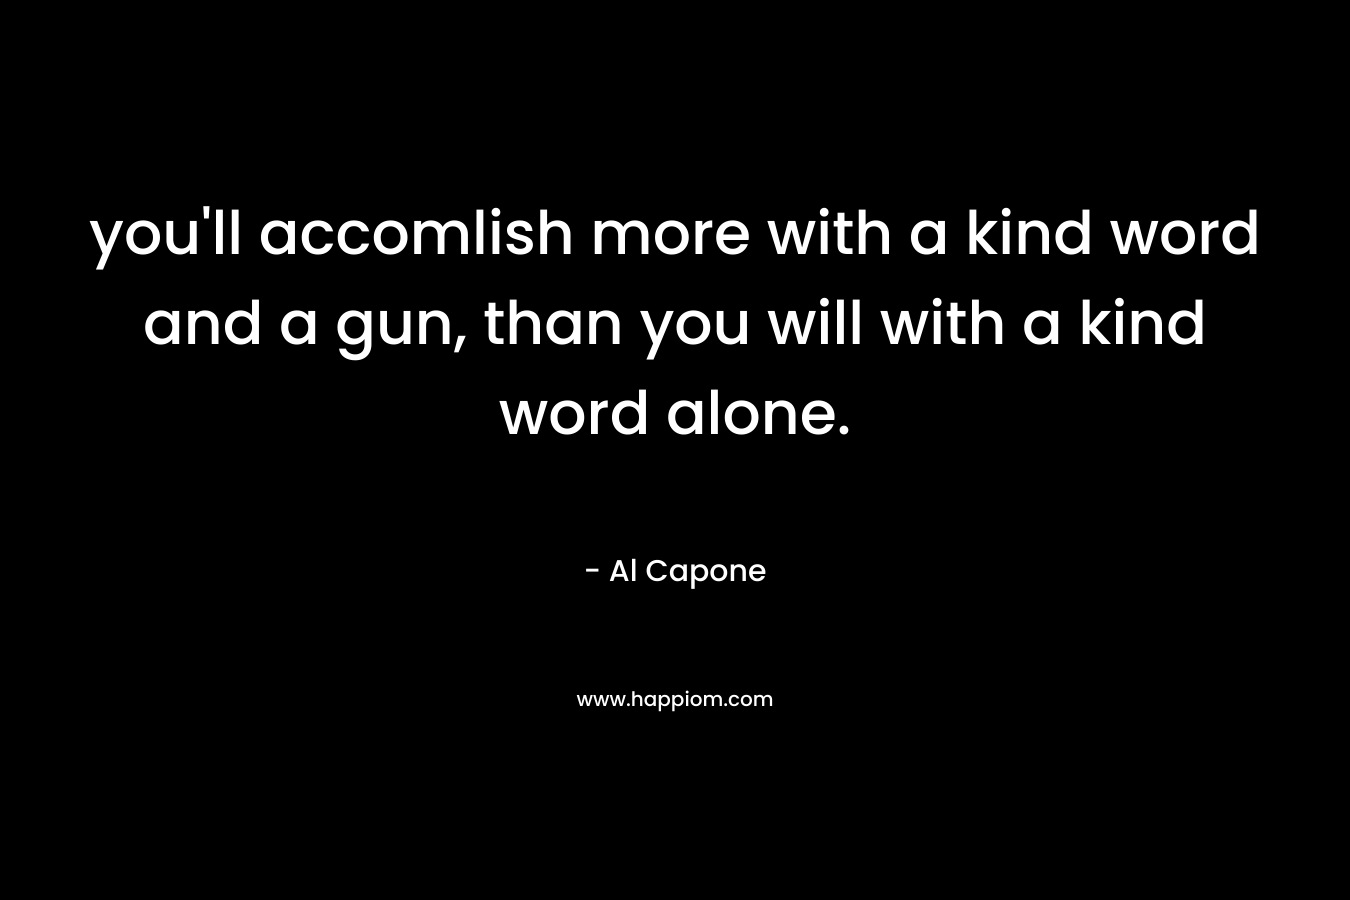 you’ll accomlish more with a kind word and a gun, than you will with a kind word alone. – Al Capone